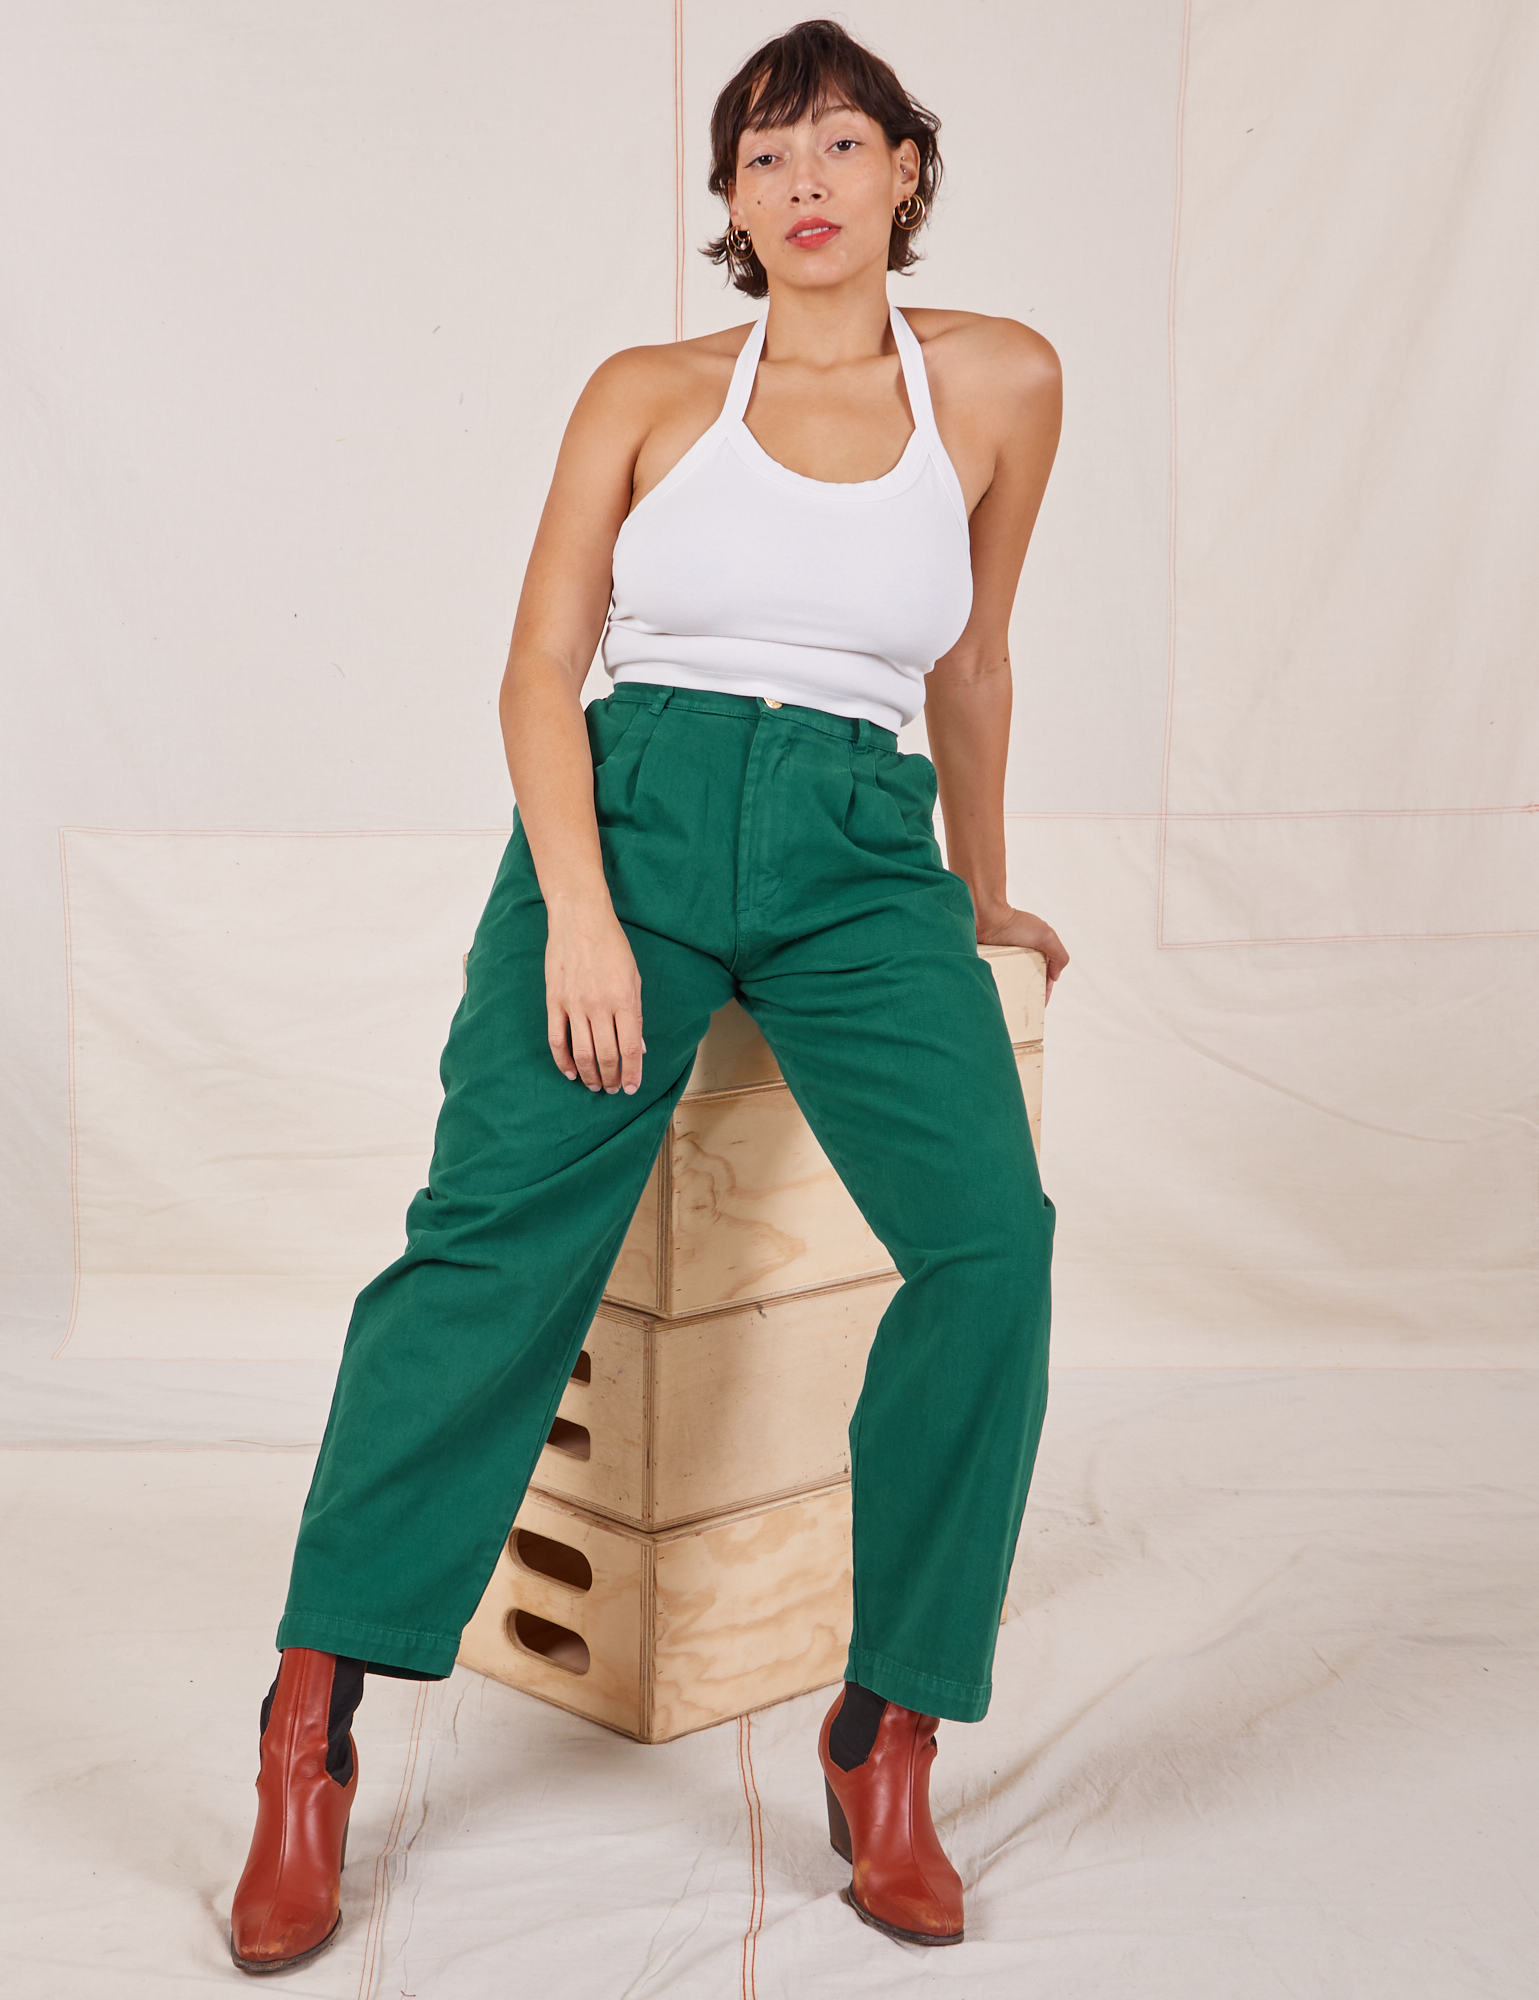 Tiara is sitting on a stack of wooden crates wearing Heavyweight Trousers in Hunter Green and Halter Top in vintage tee off-white